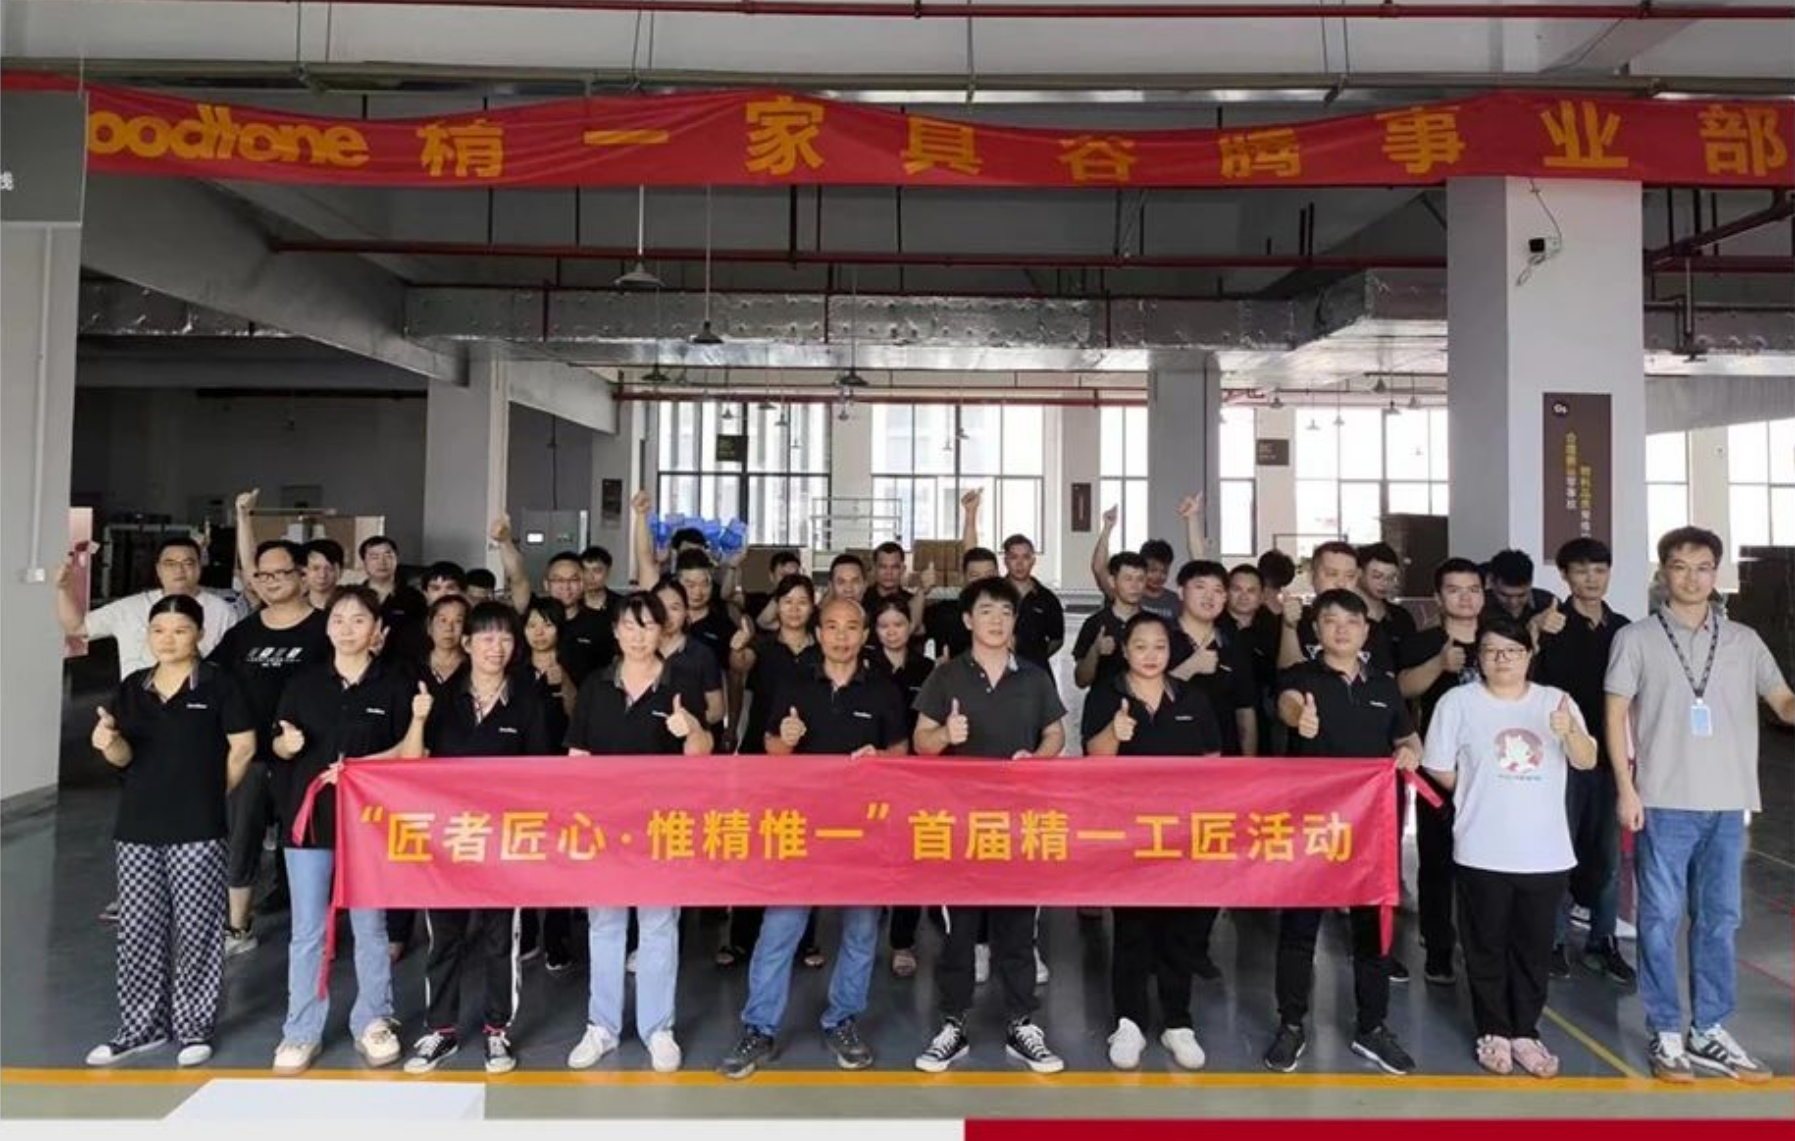 "Goodtone Division held the activity of "Jingyi Craftsman